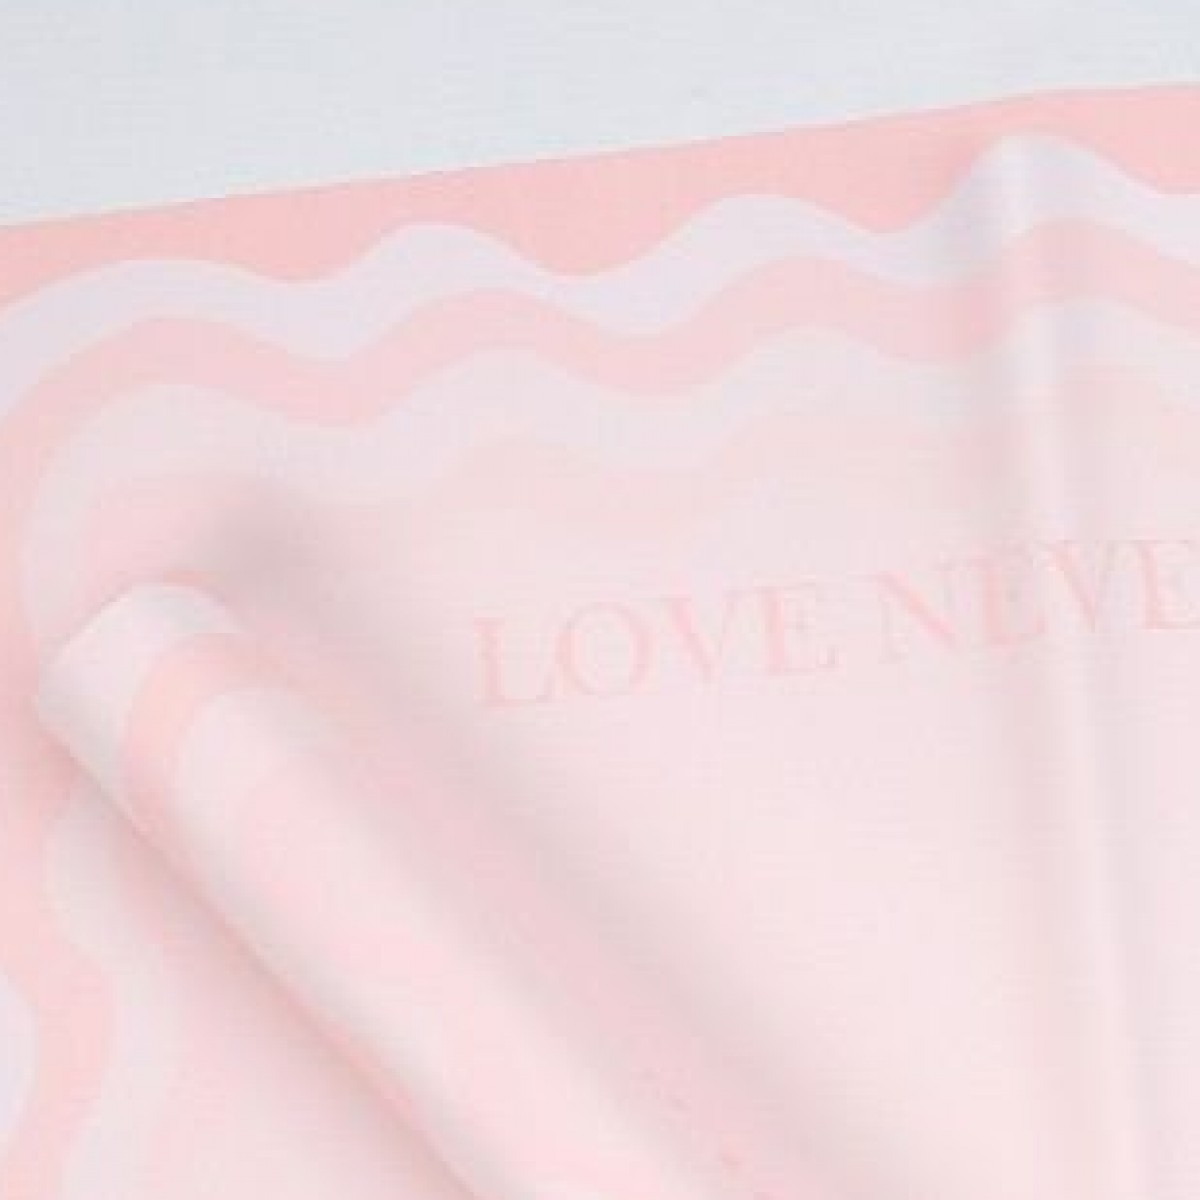 7646 Nude Pink Ripple Waves Border 58x58cm (20 Sheets)